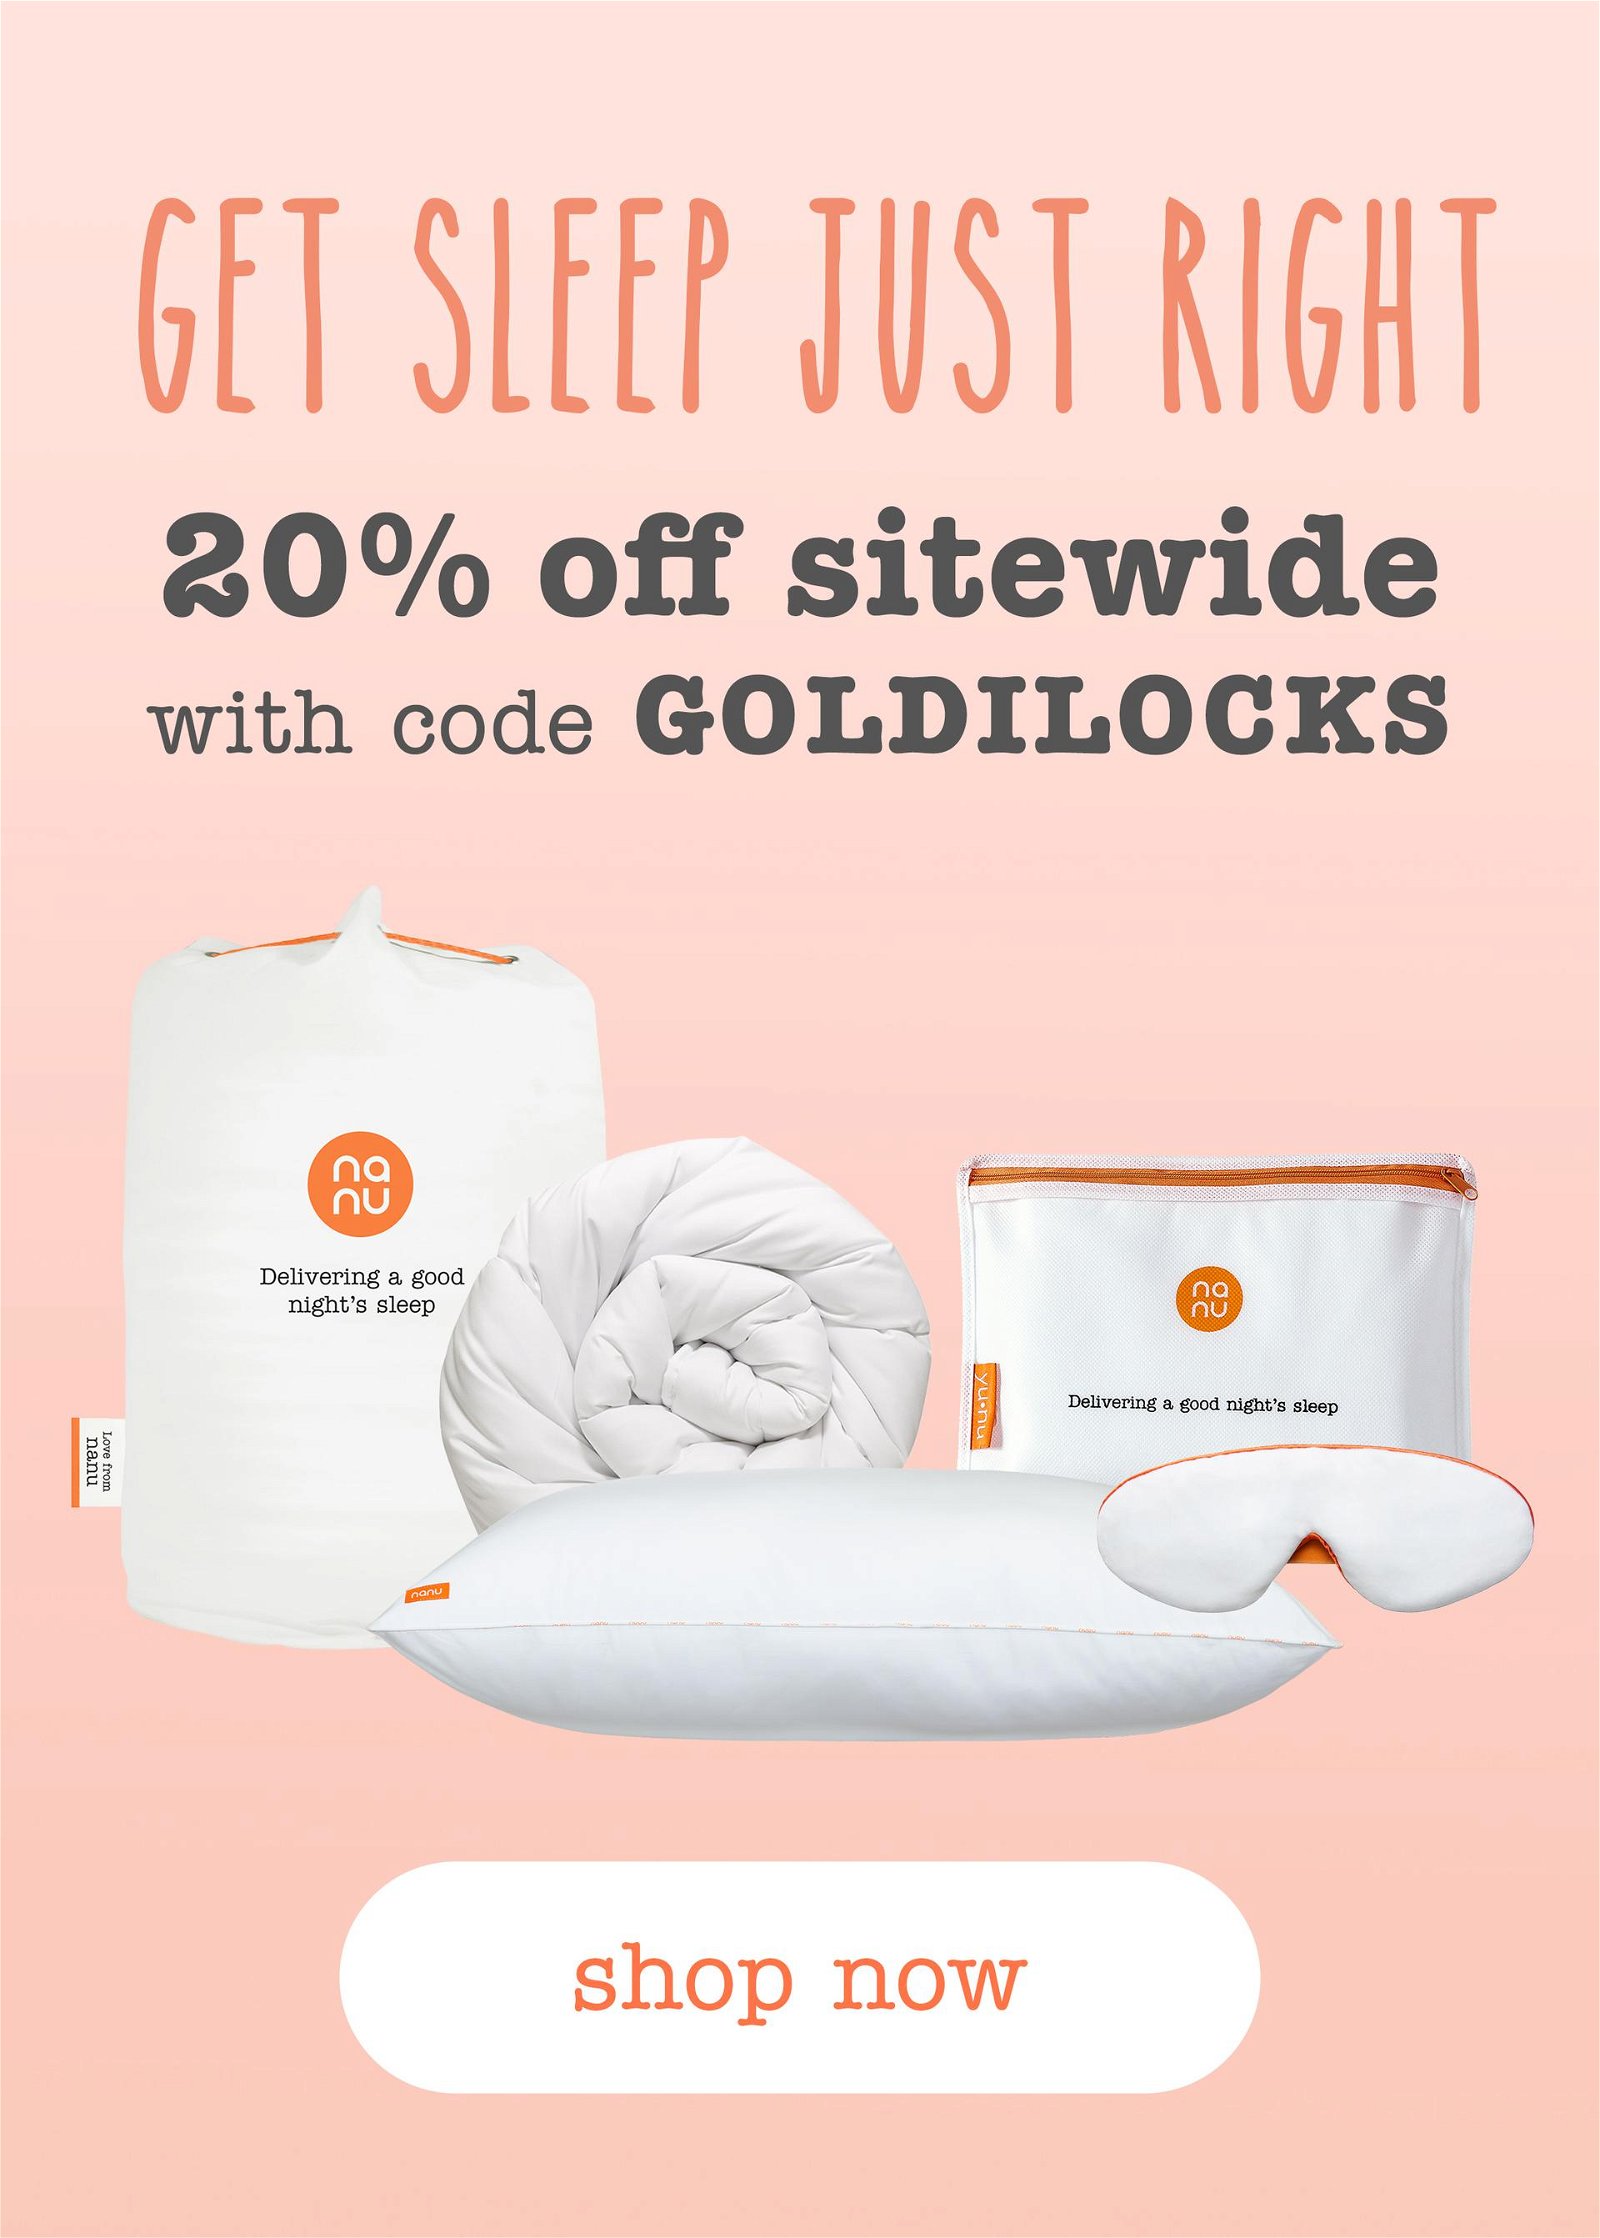 Get sleep just right - 20% off sitewide with code GOLDILOCKS